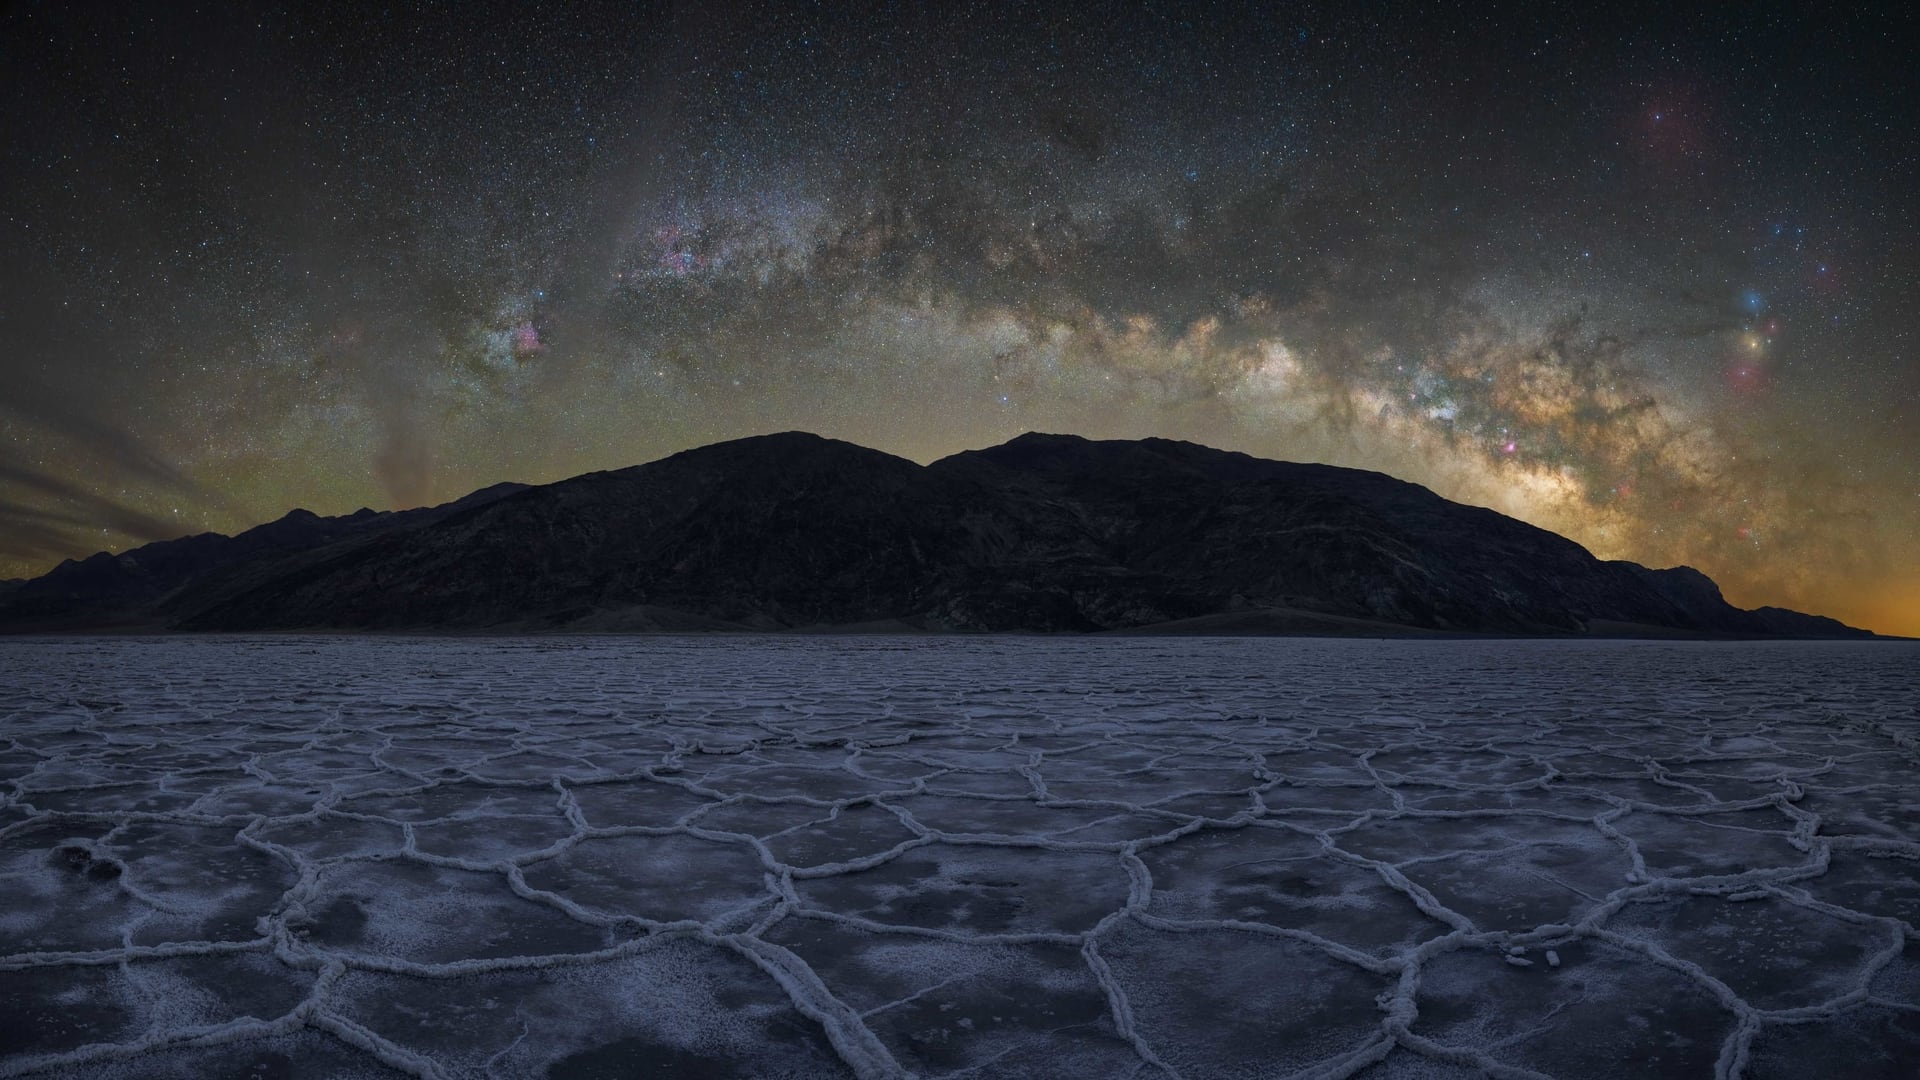 Milky Way arch over mountain and dry land in Death Valley